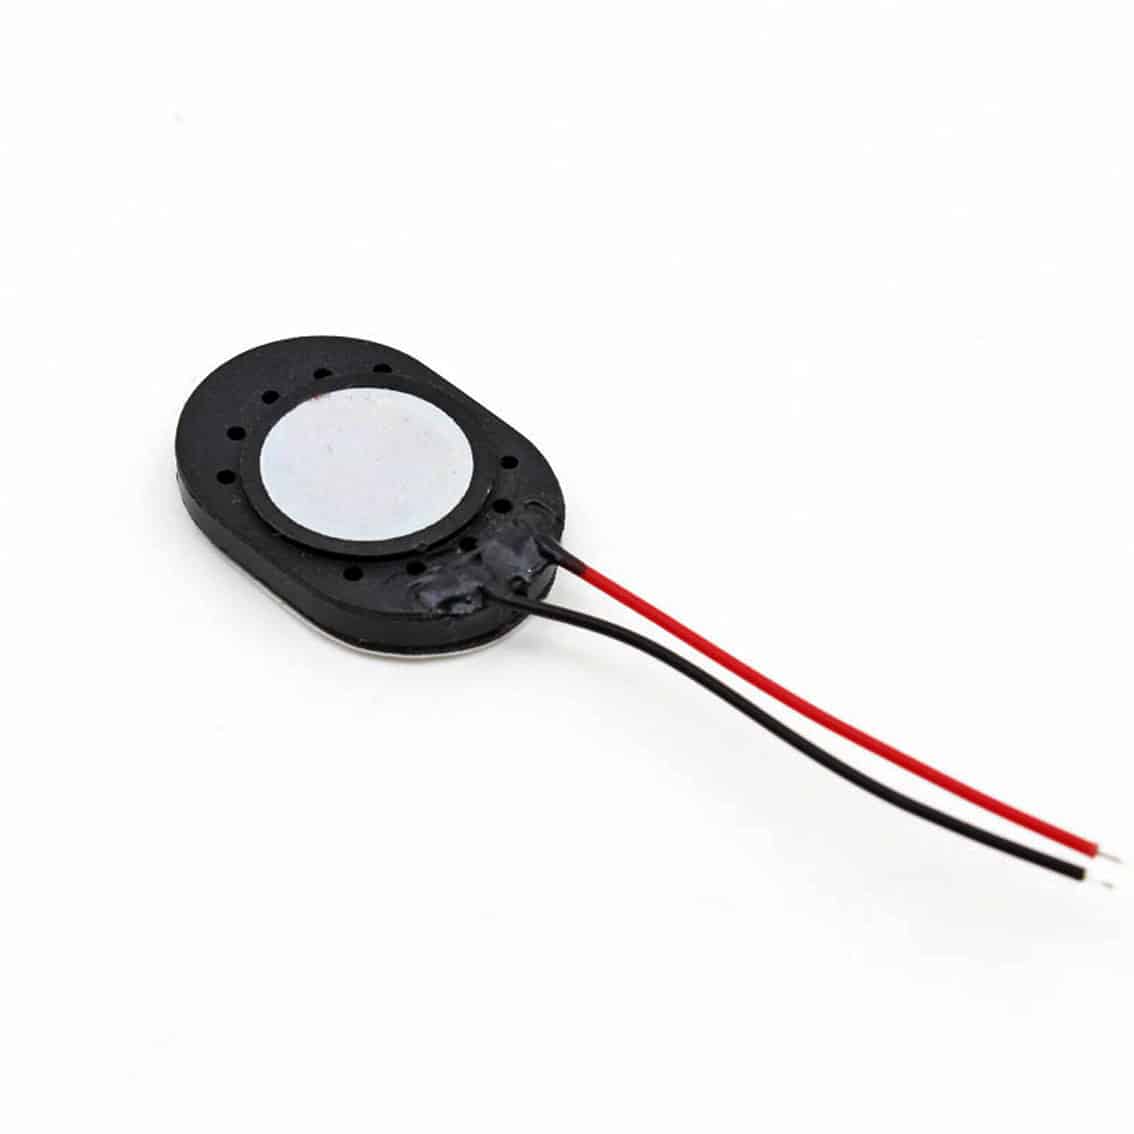 1W 8 OHM Loud Speaker with Self Adhesive Gasket – Pack of 2 2